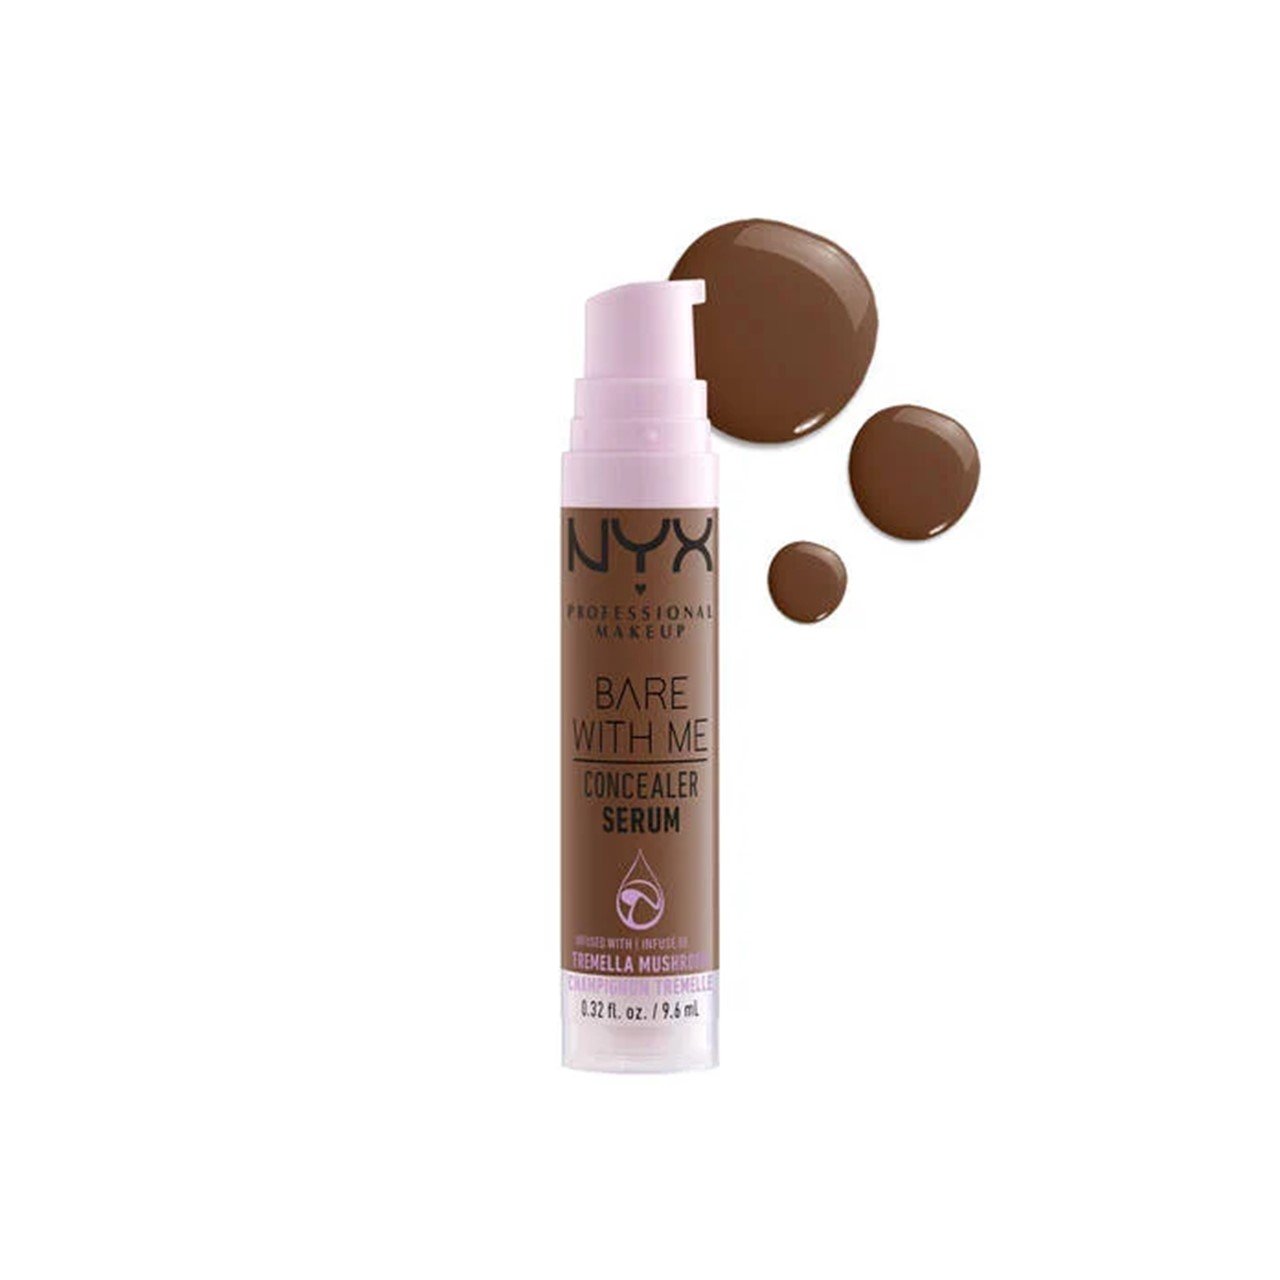 Rich Pro NYX Concealer Serum Makeup Buy · Bare 9.6ml With Me 12 USA